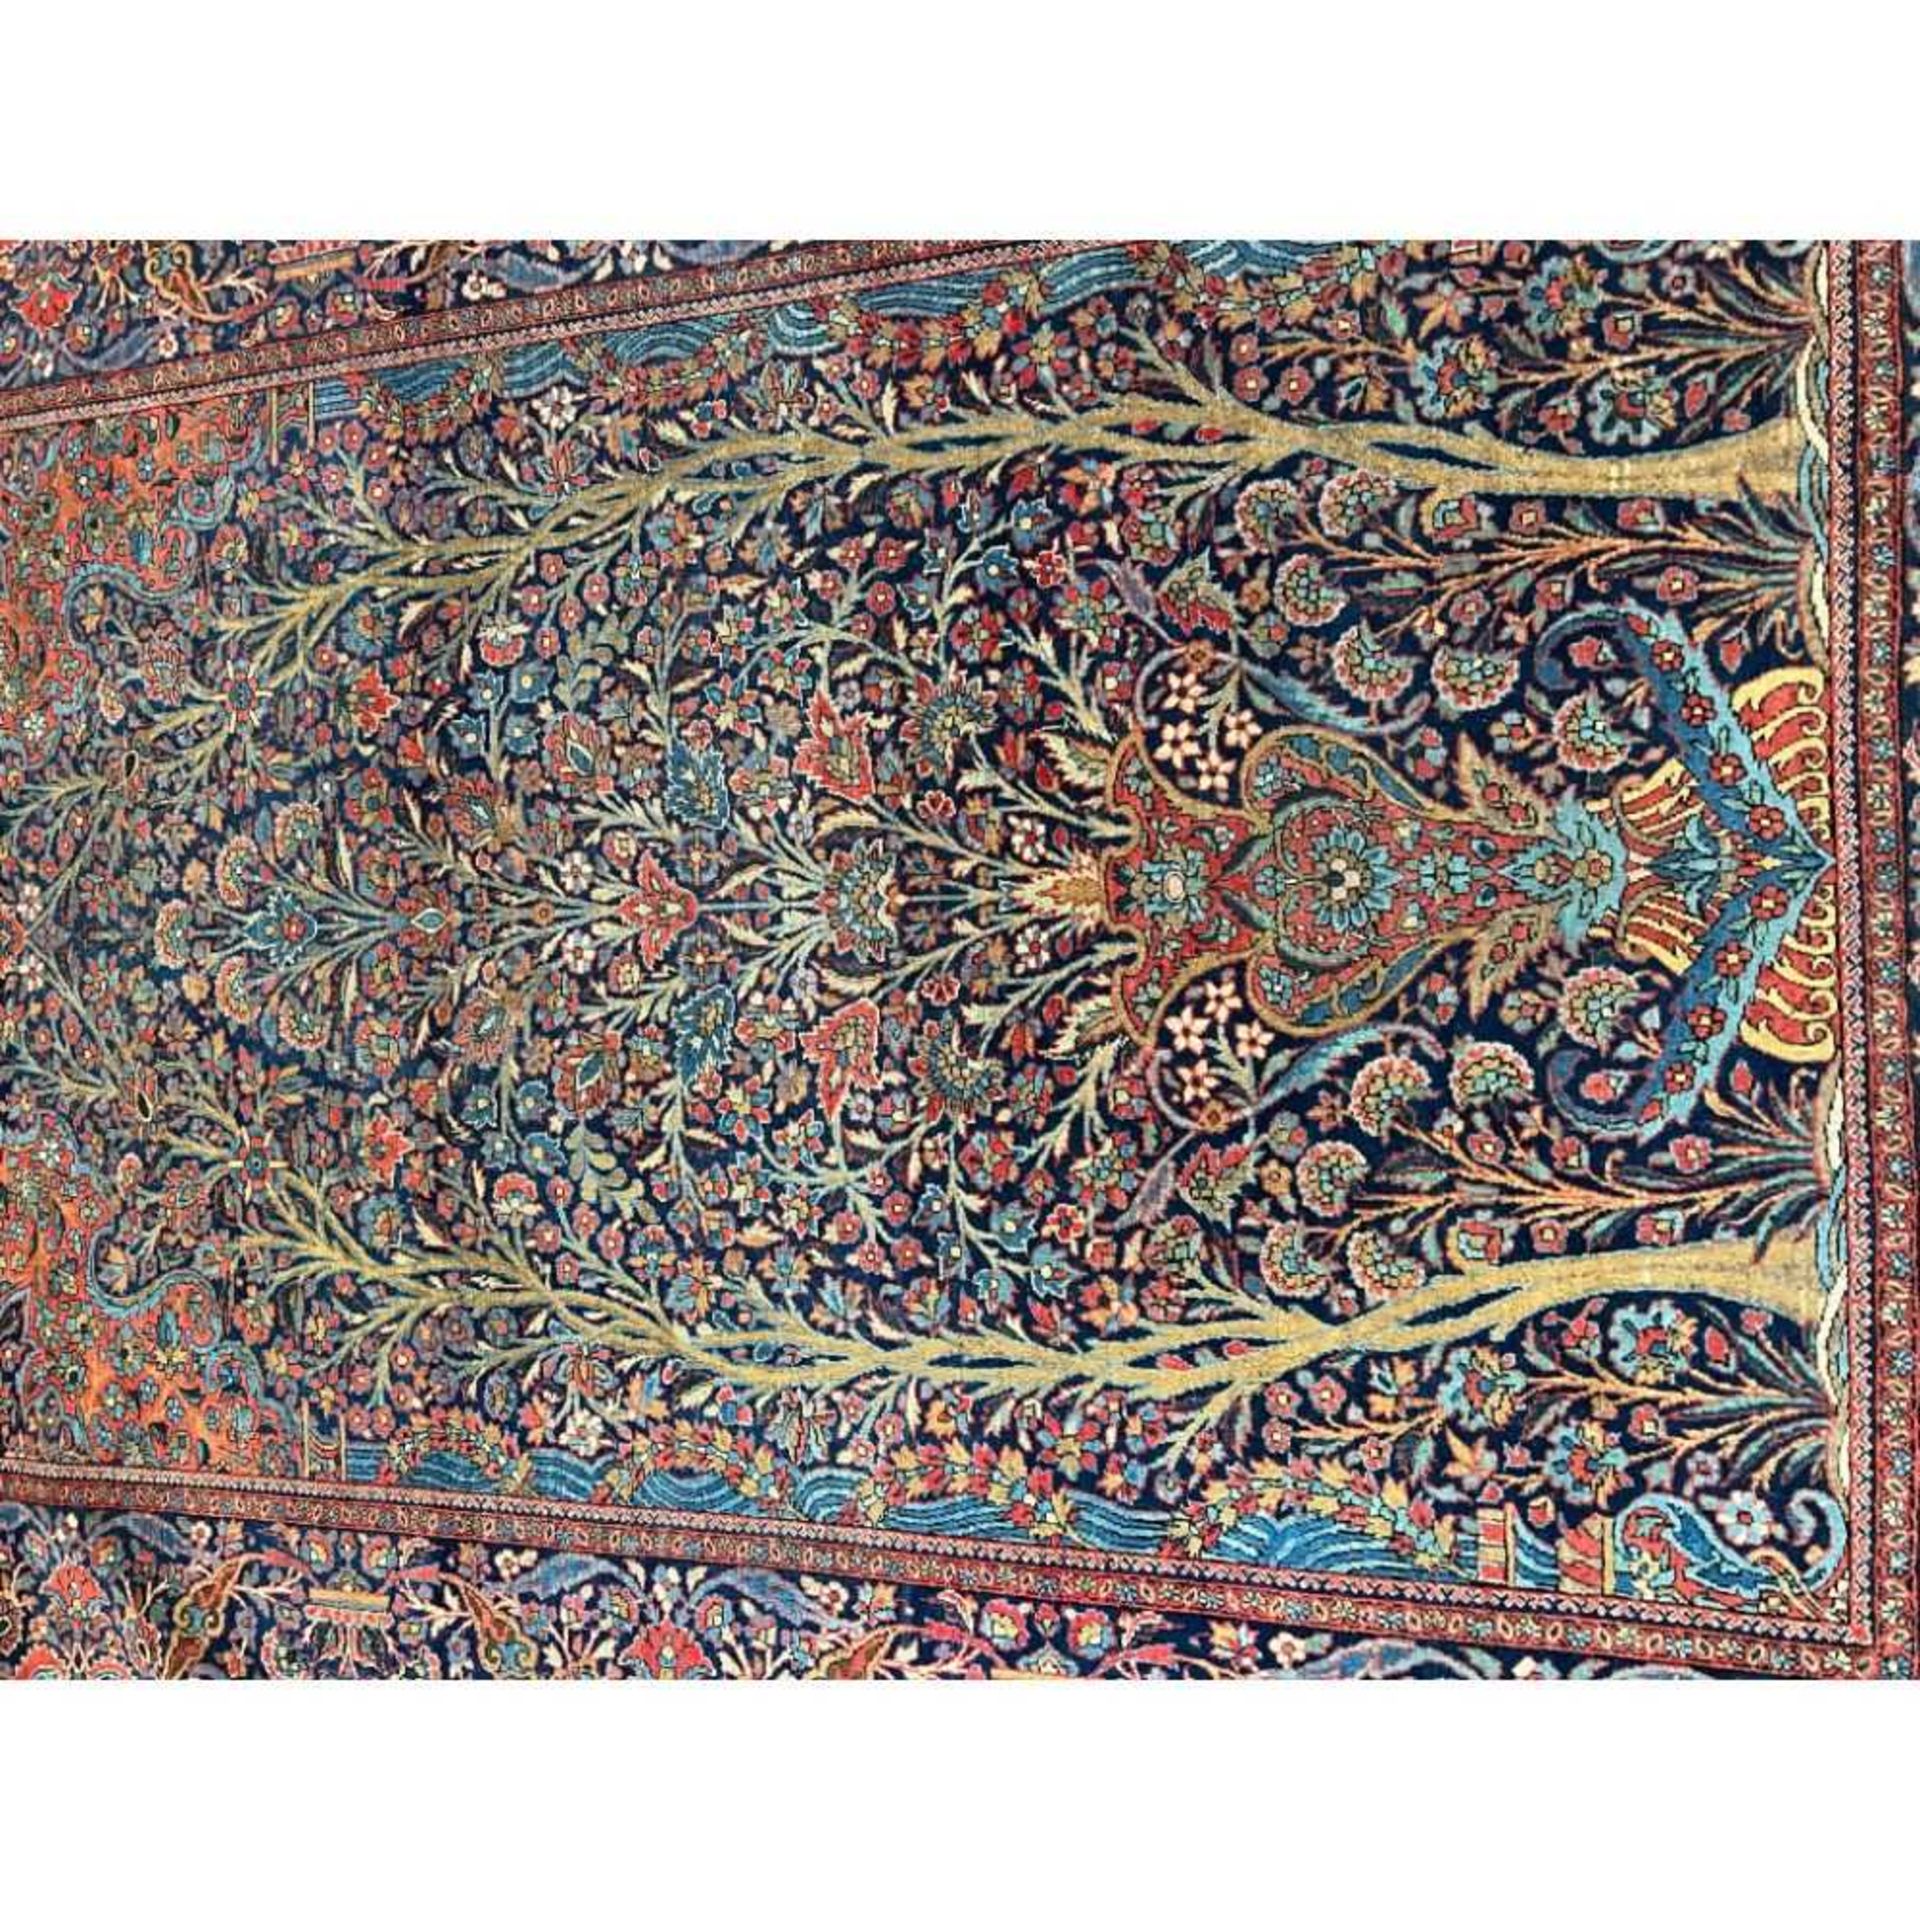 A FINE PAIR OF 1920'S MOHTASHAM KASHAN CARPETS - Image 3 of 38